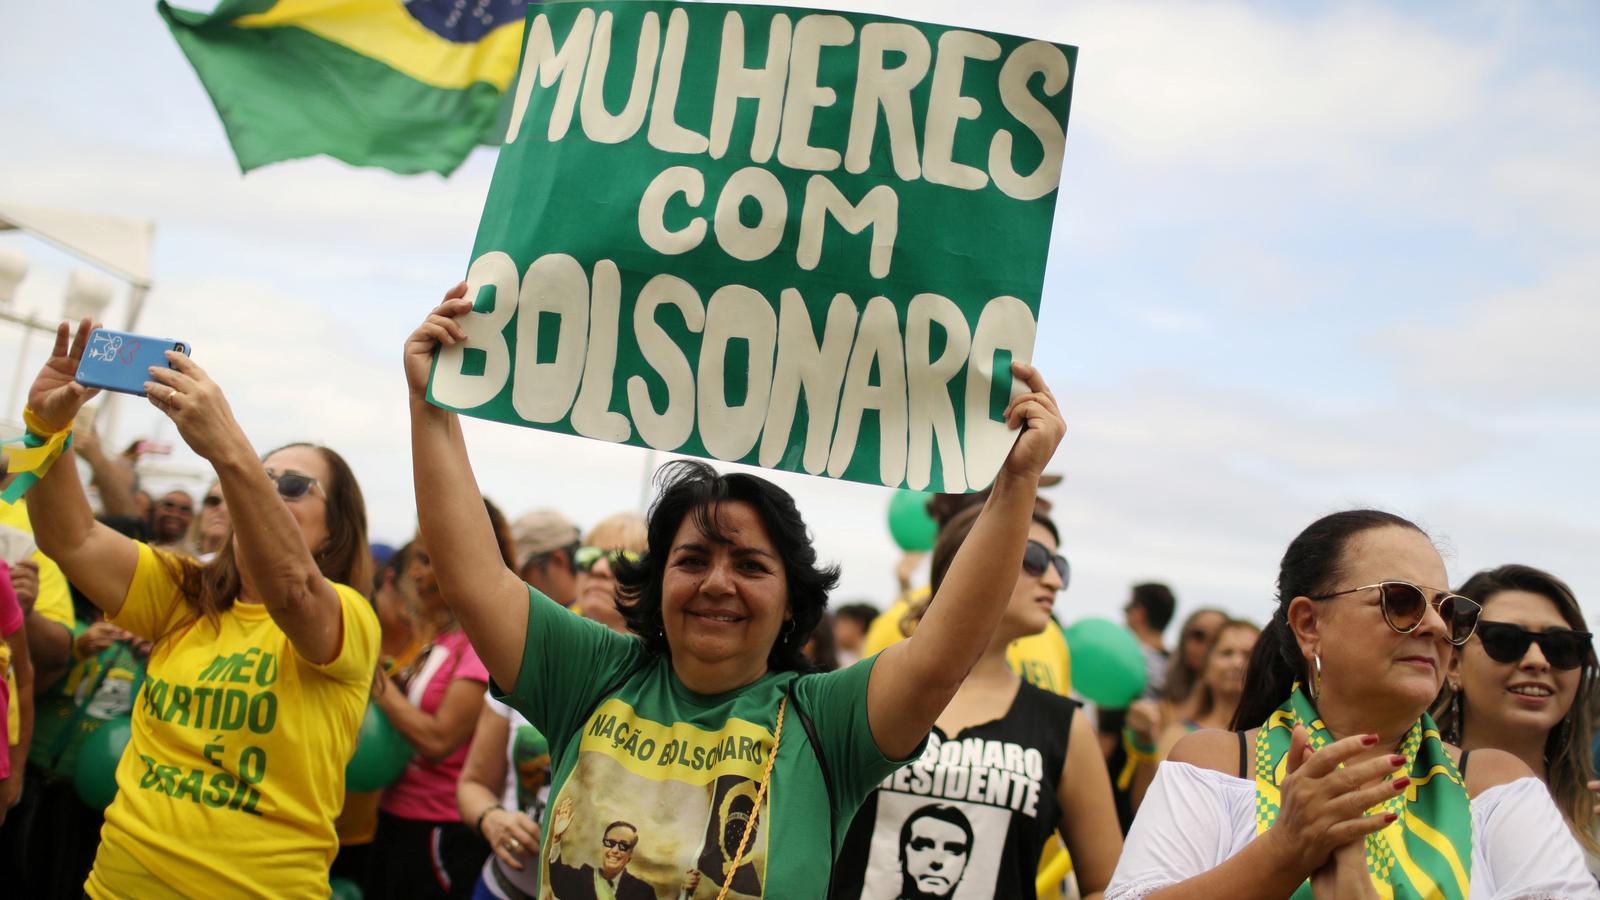 A woman holds up a green sign with white letters that says "Women for Bolsonaro" 